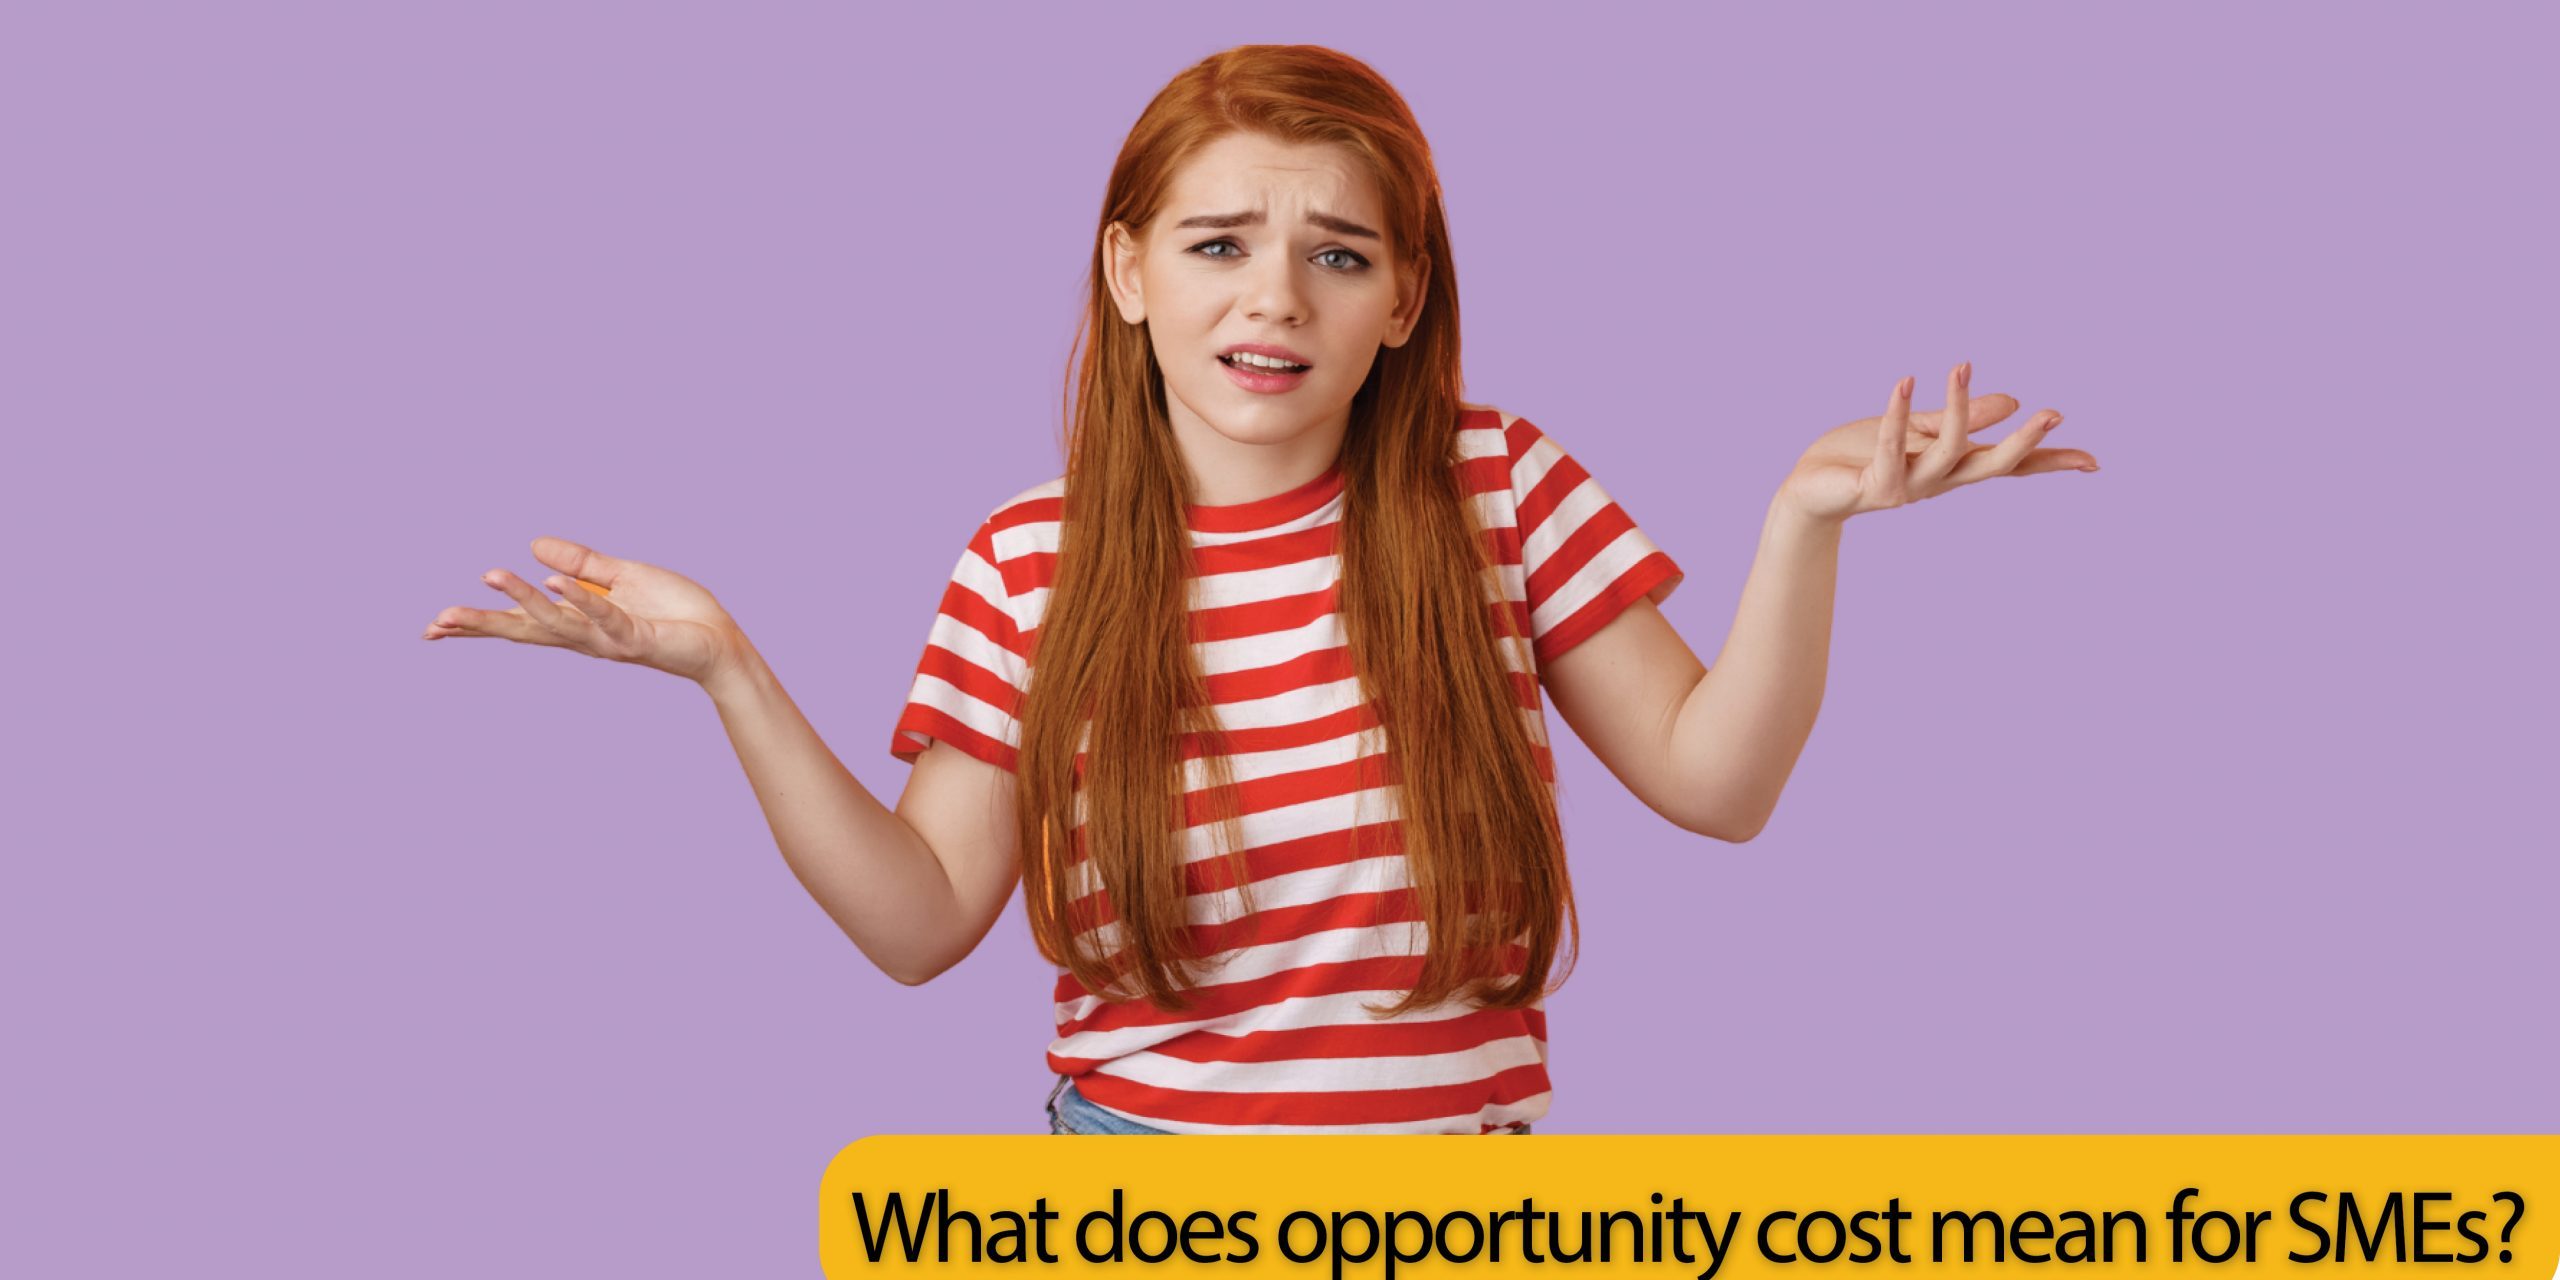 Opportunity Cost for SMEs